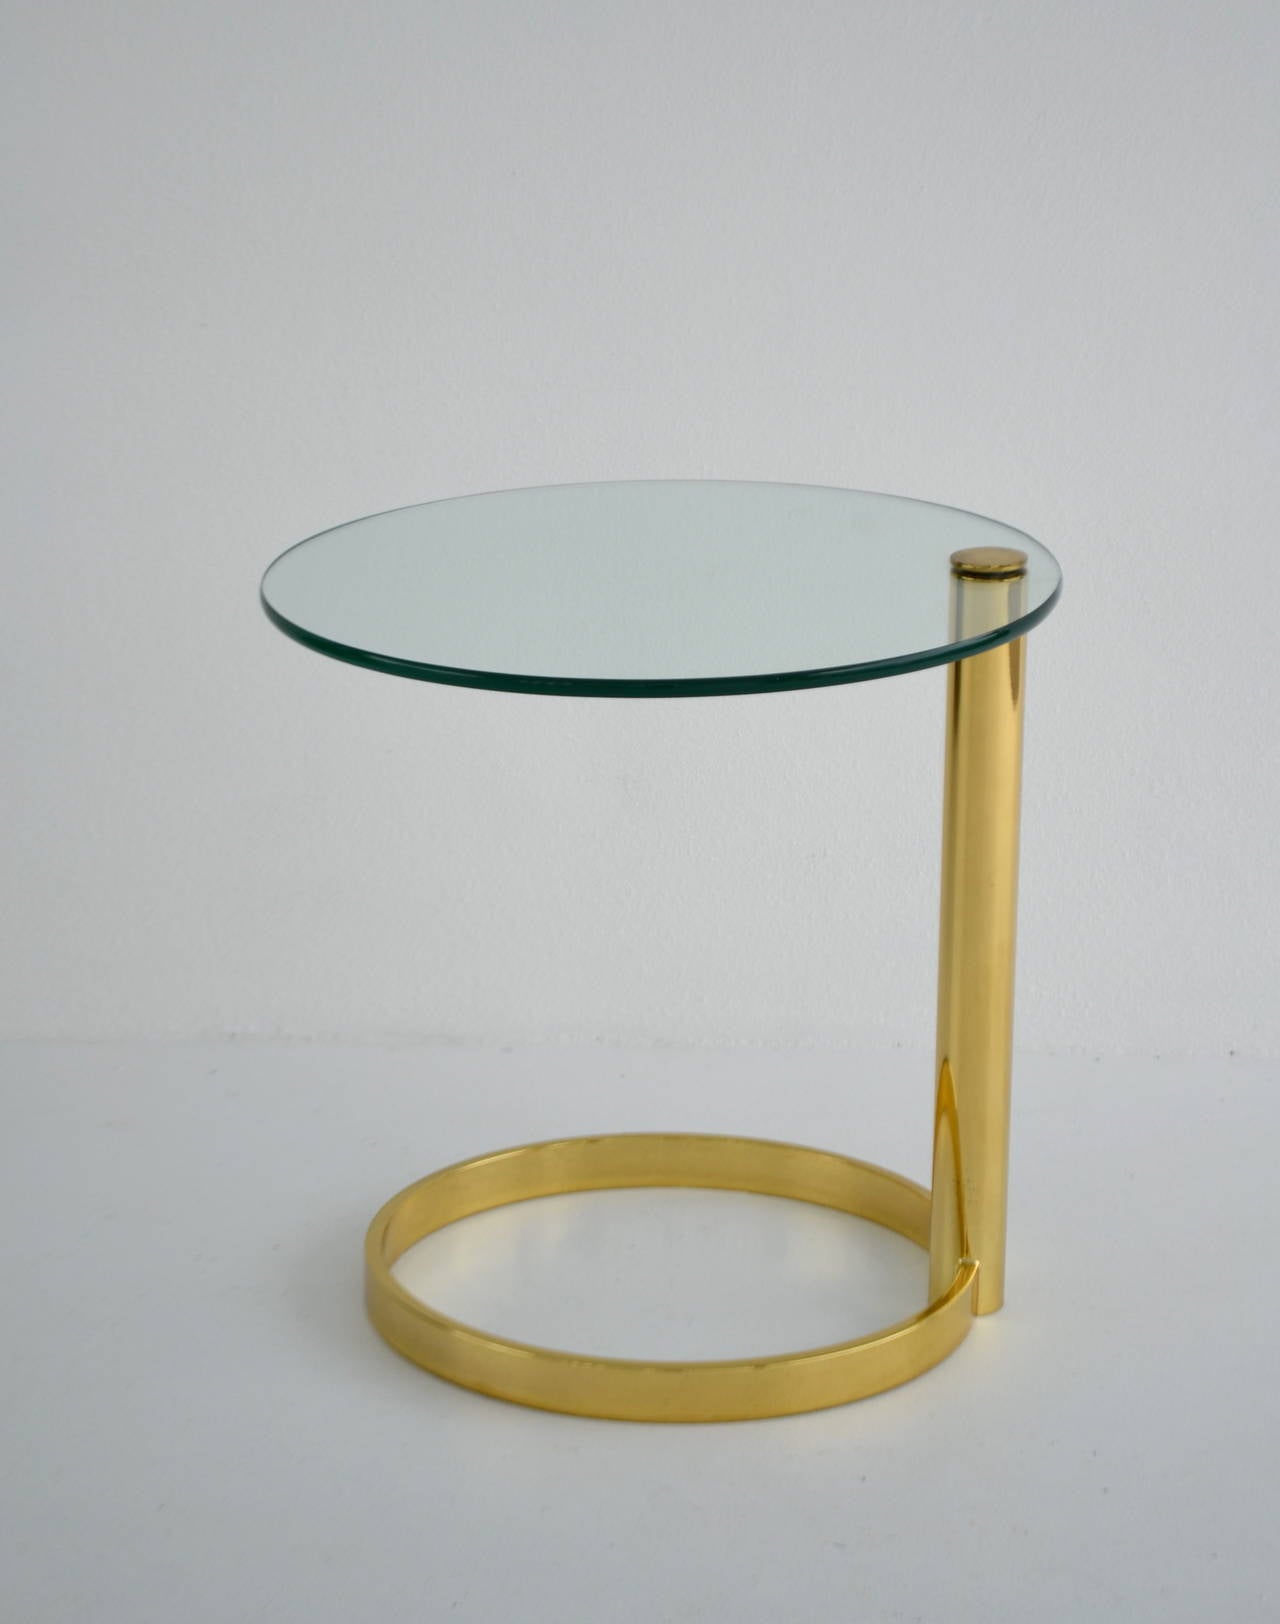 American Sculptural Brass Side Table by Pace Collection